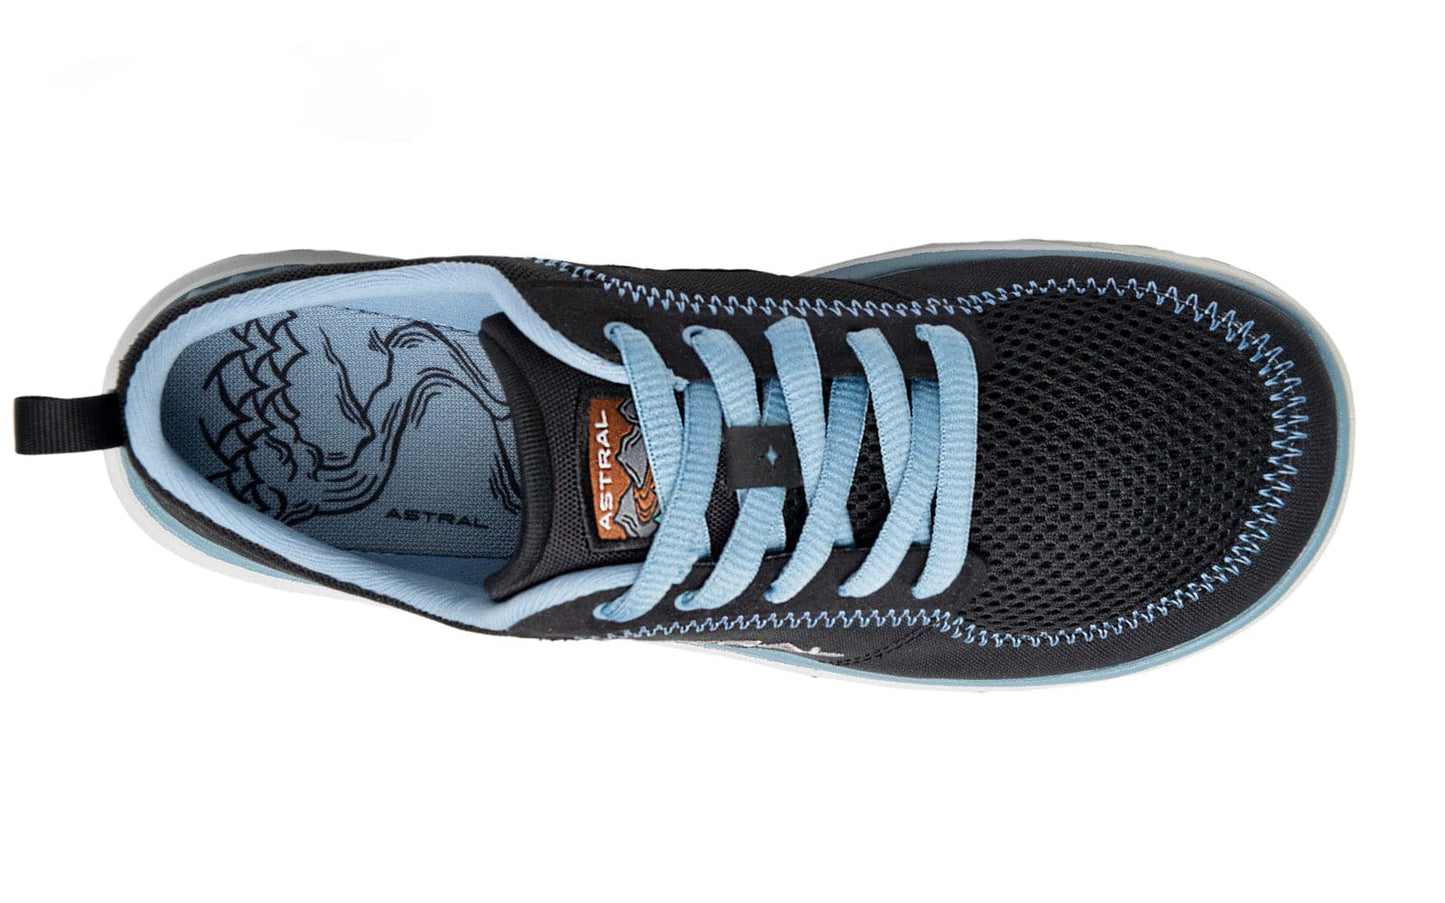 Featuring the Brewess 2.0 - Women's watersports, women's footwear manufactured by Astral shown here from a third angle.